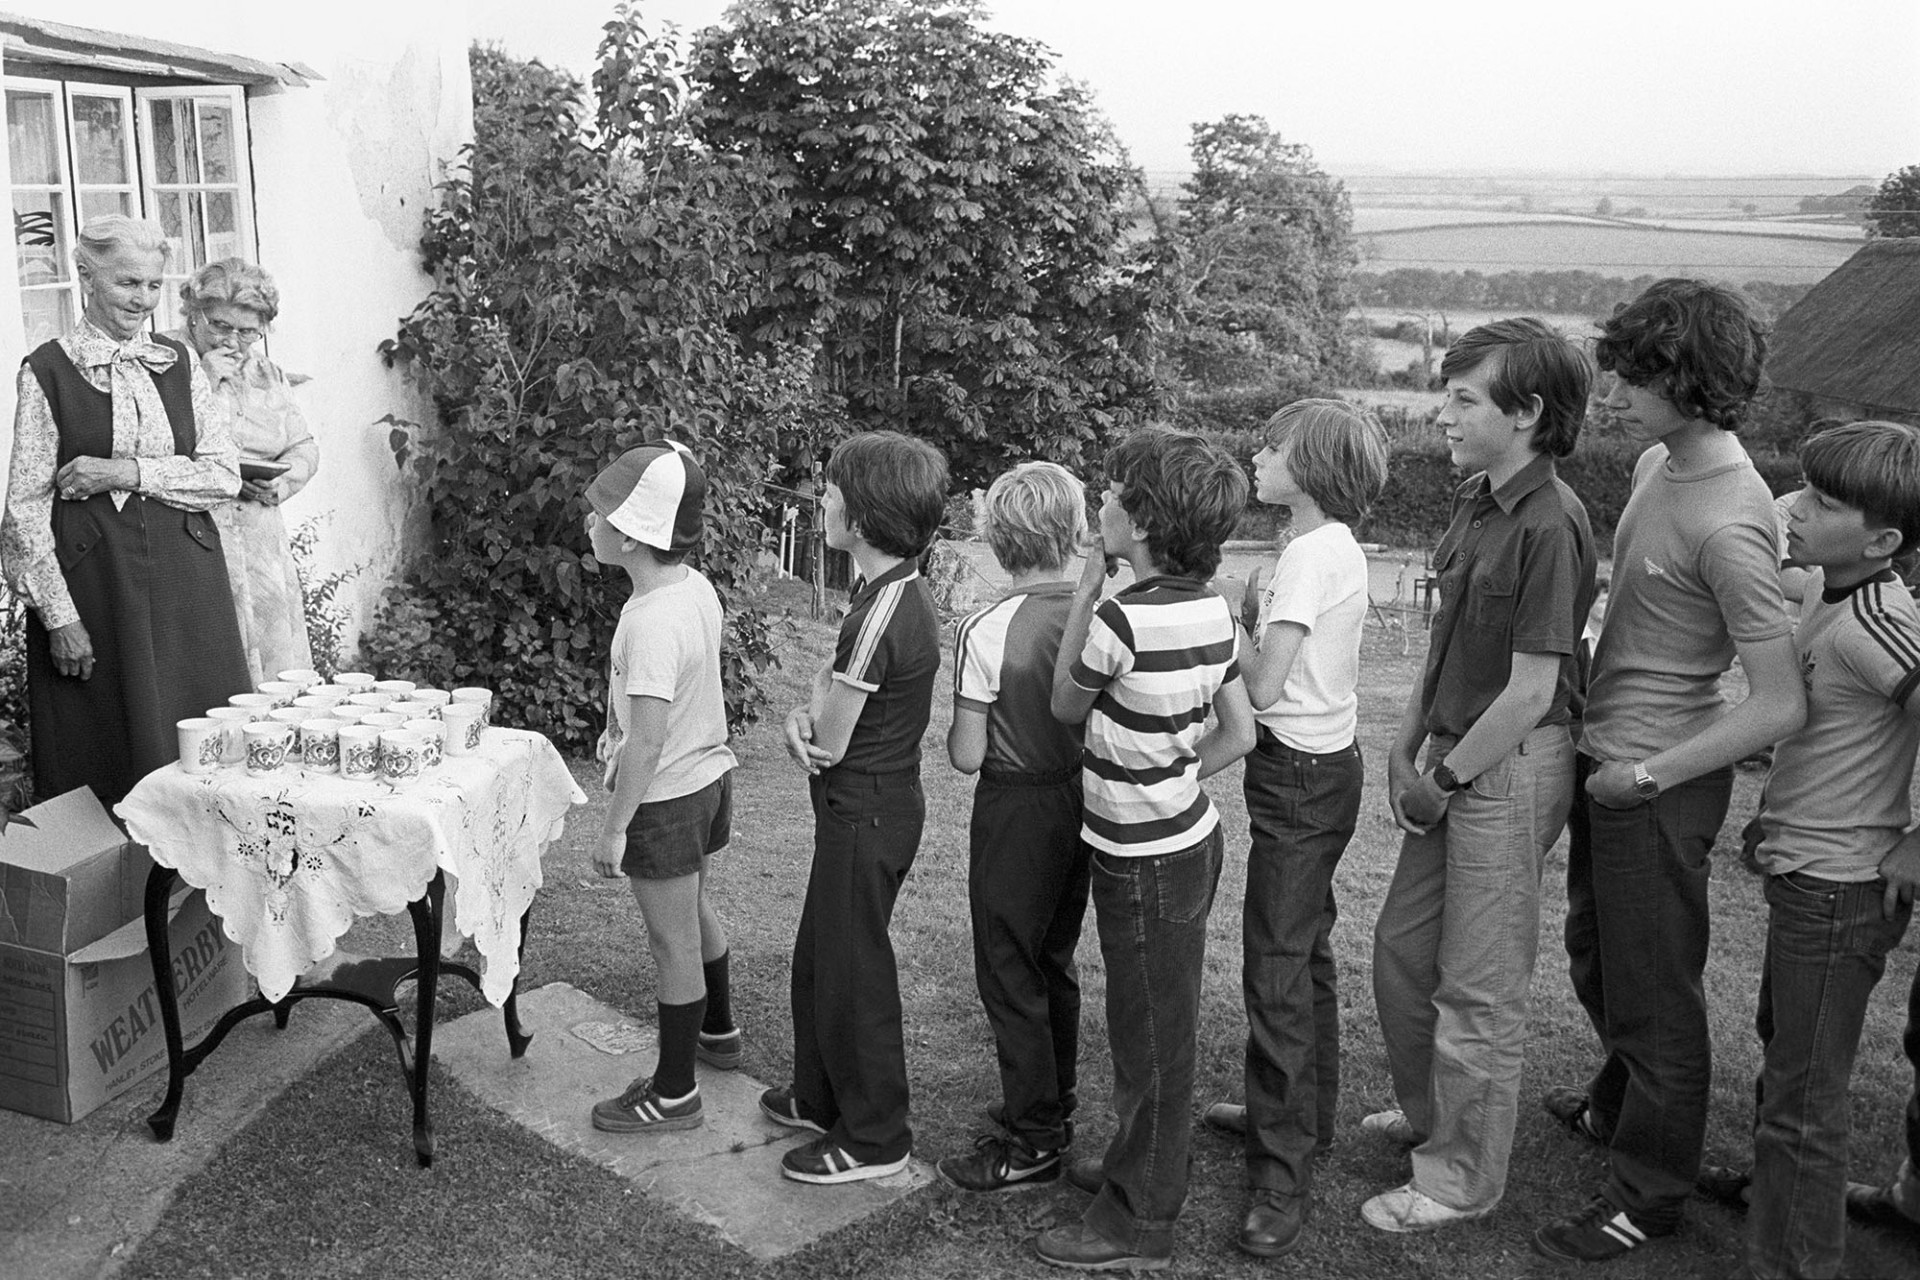 Royal Wedding. People queuing for royal mugs in front of cottage.
[Children queueing up in a garden at Iddesleigh for the presentation of mugs to commemorate the Royal Wedding of Prince Charles and Lady Diana Spencer. Two ladies are waiting to present the mugs.]